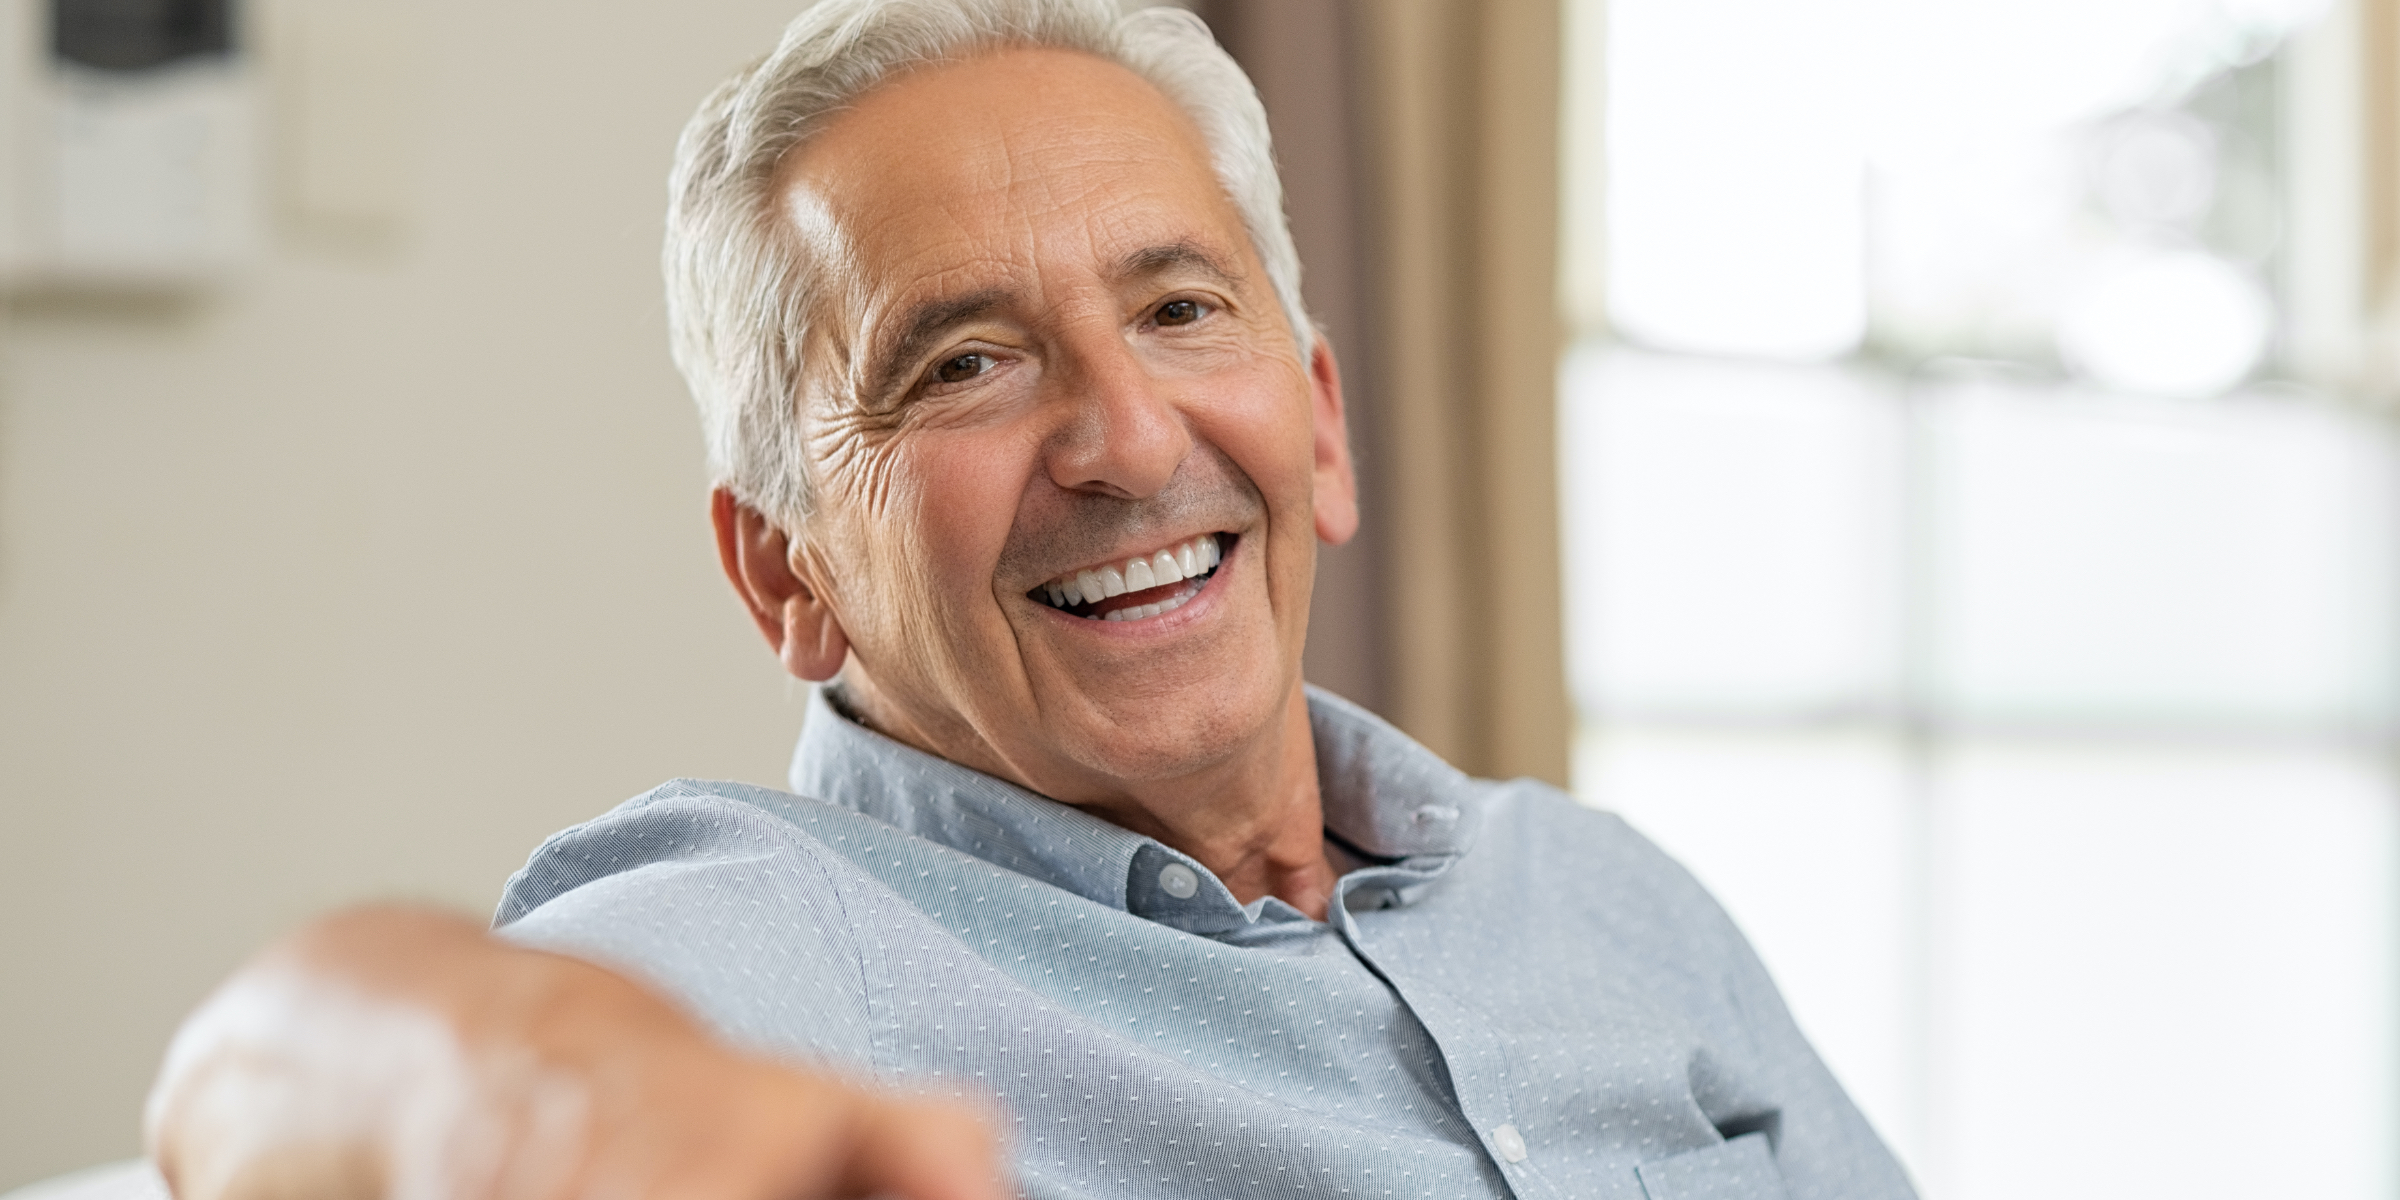 Smiling older man sitting on a couch